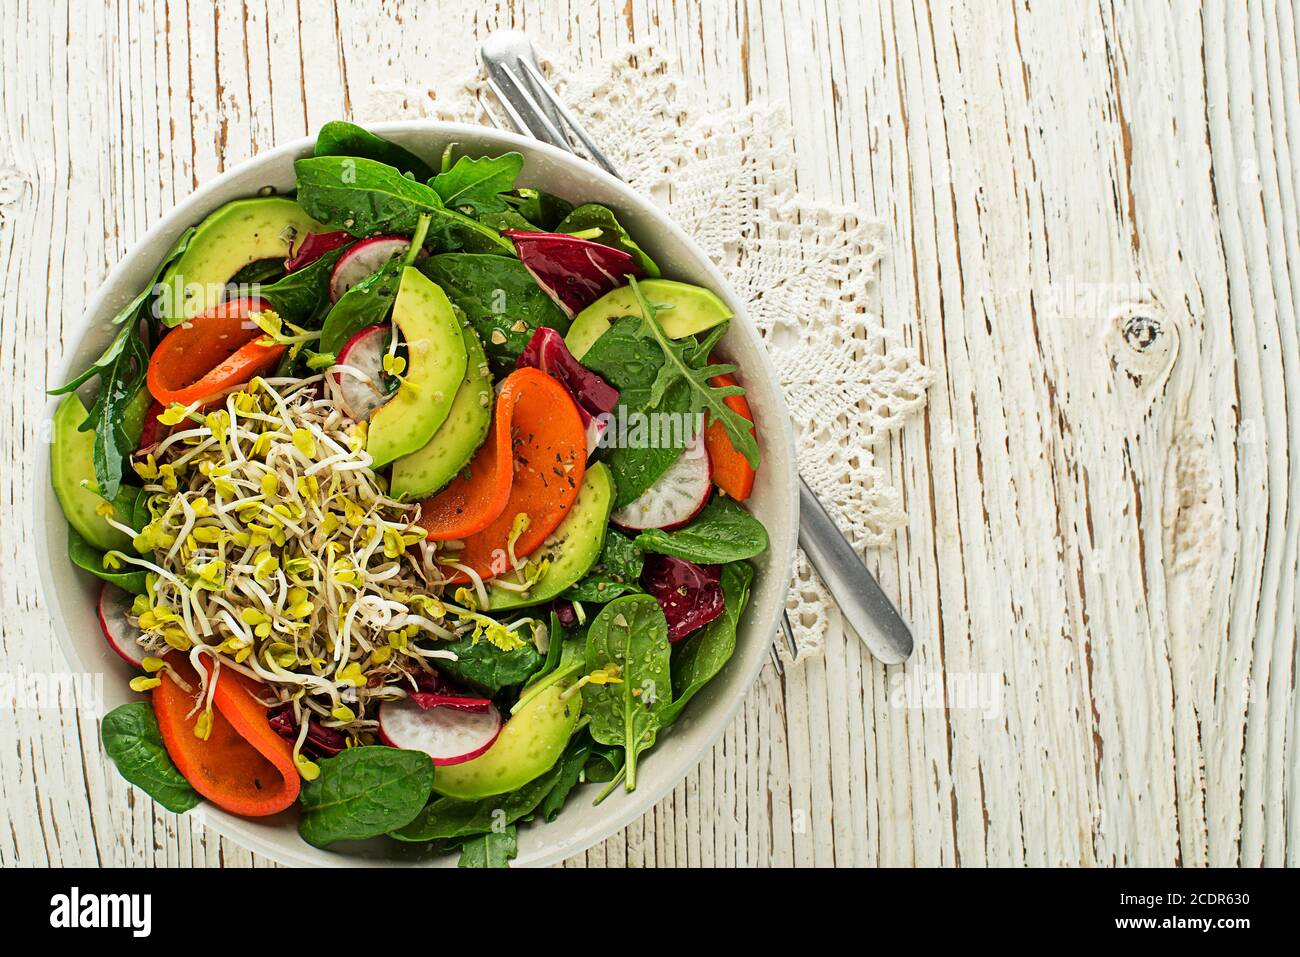 Healthy green salad with alfalfa sprouts, avocado and fruit on wooden background Stock Photo